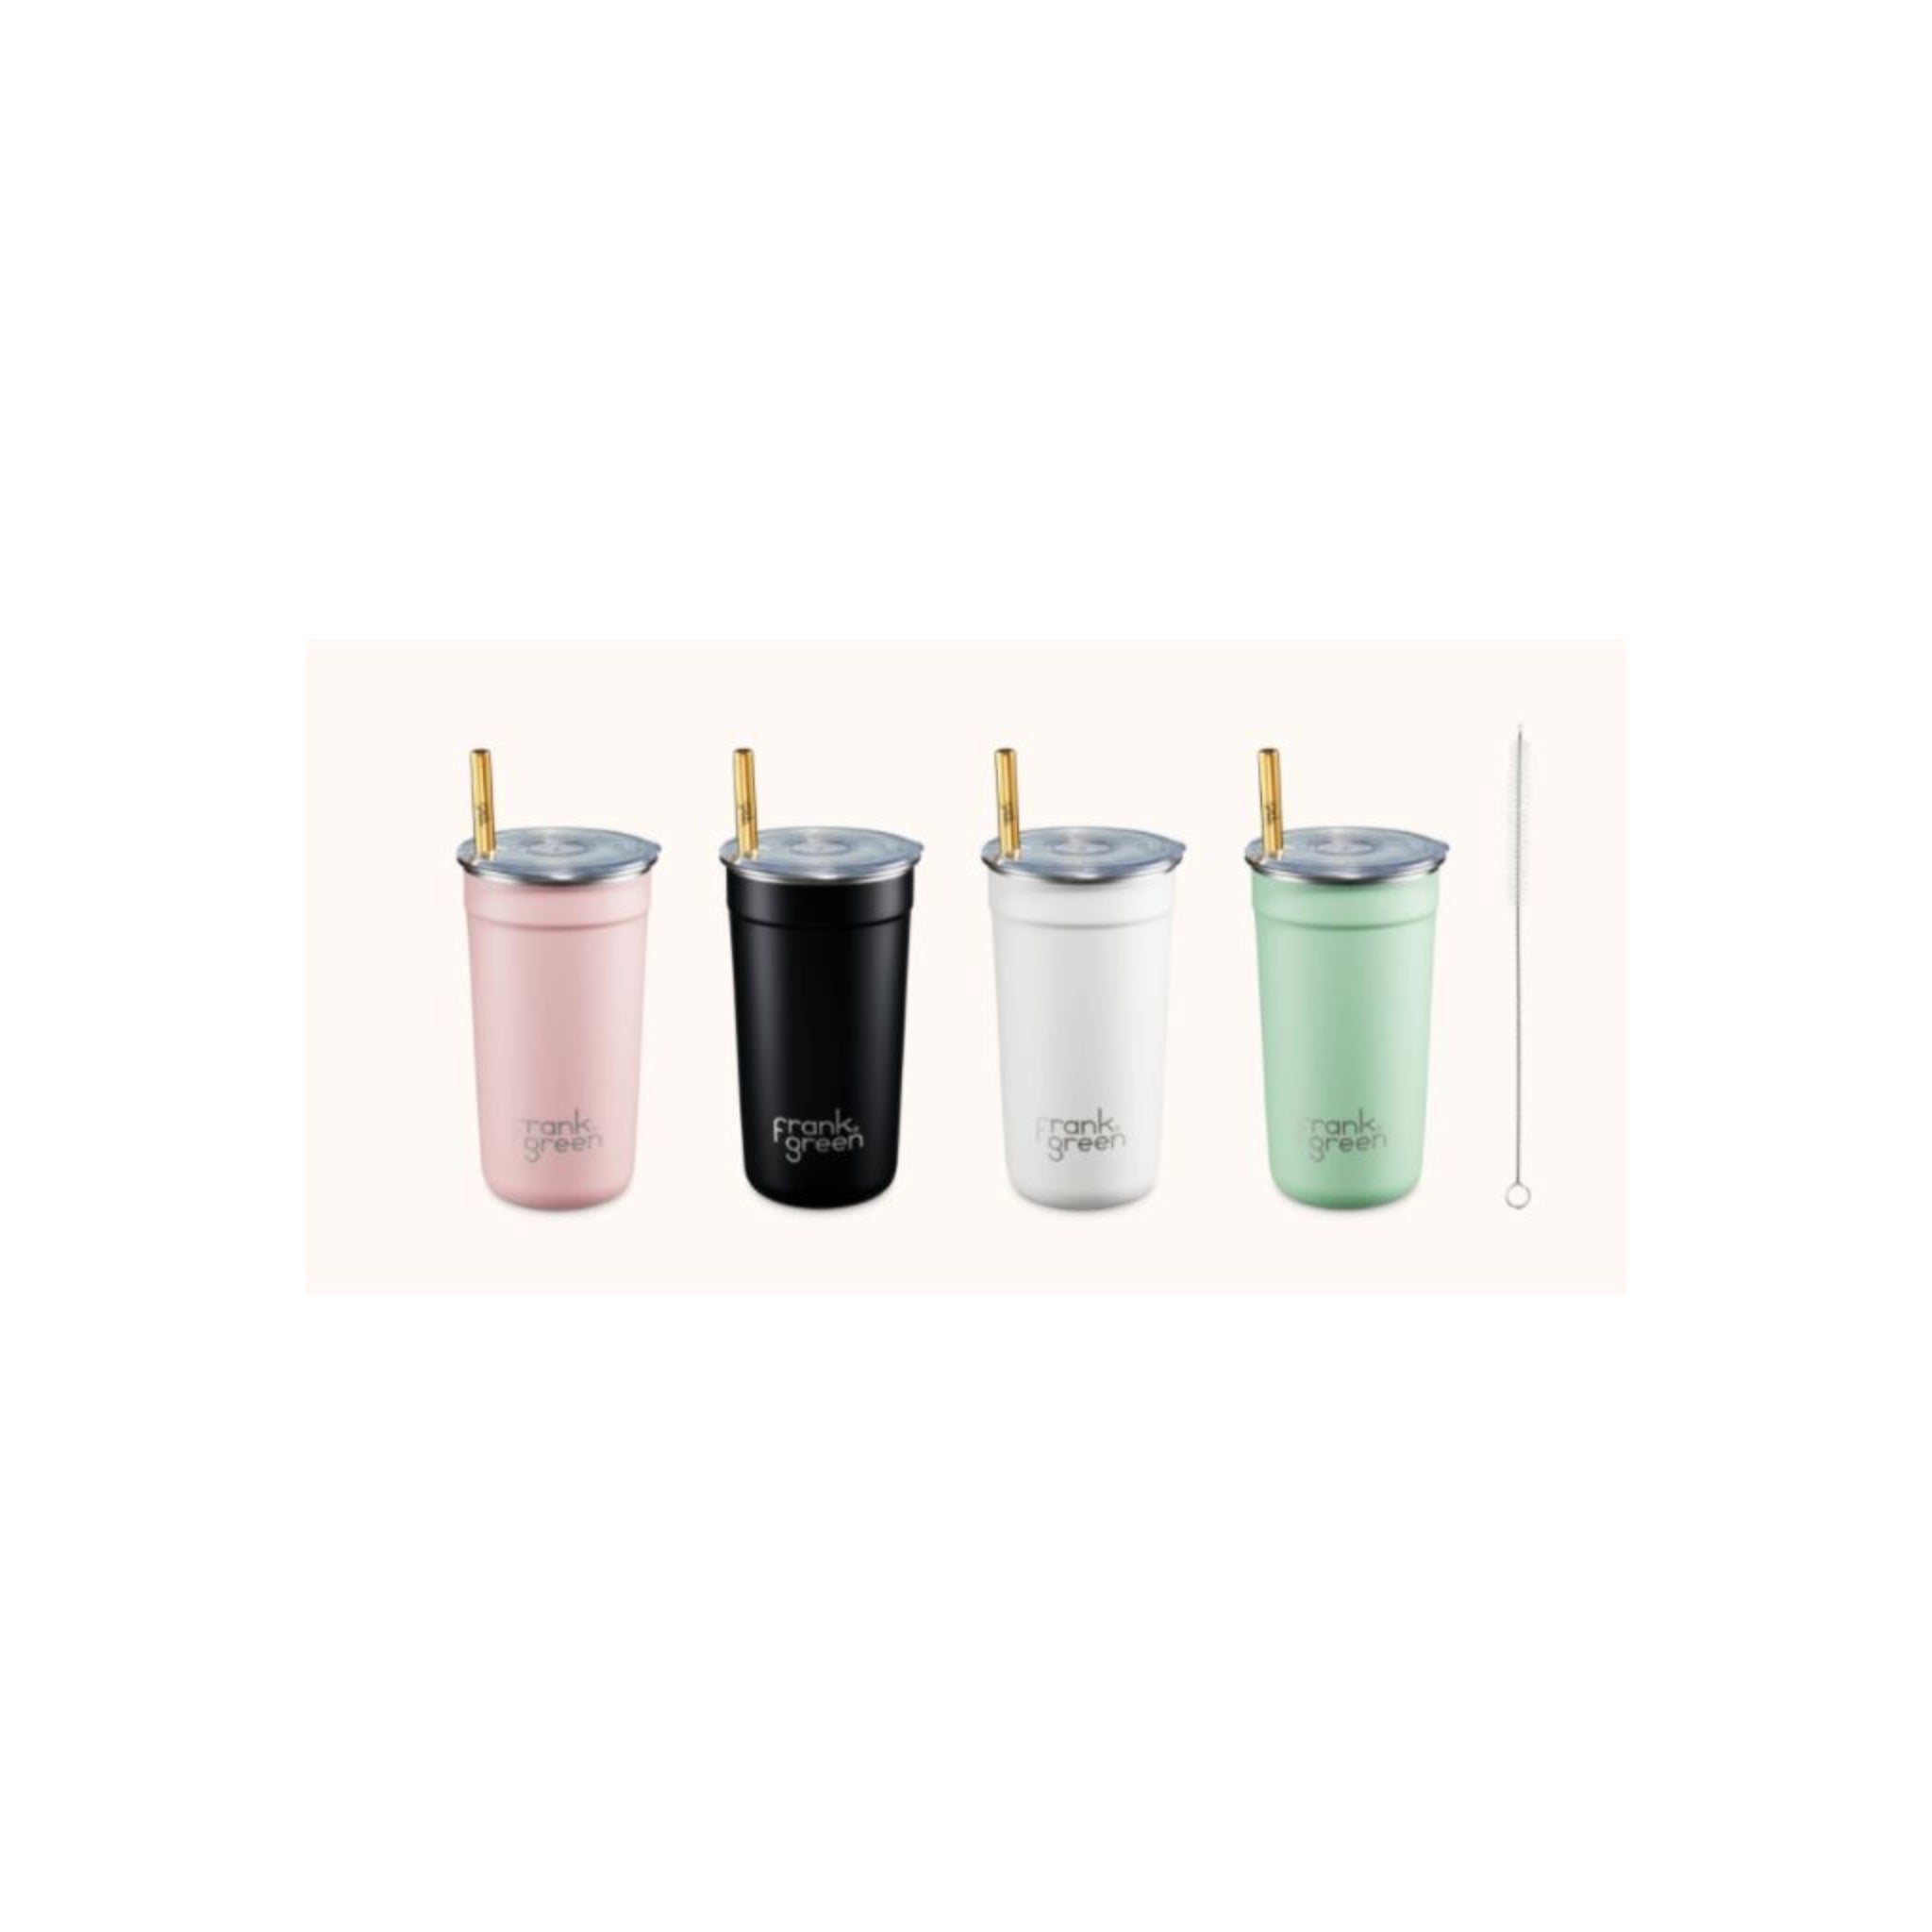 Frank Green 16oz Reusable Party Cup 4 Pack